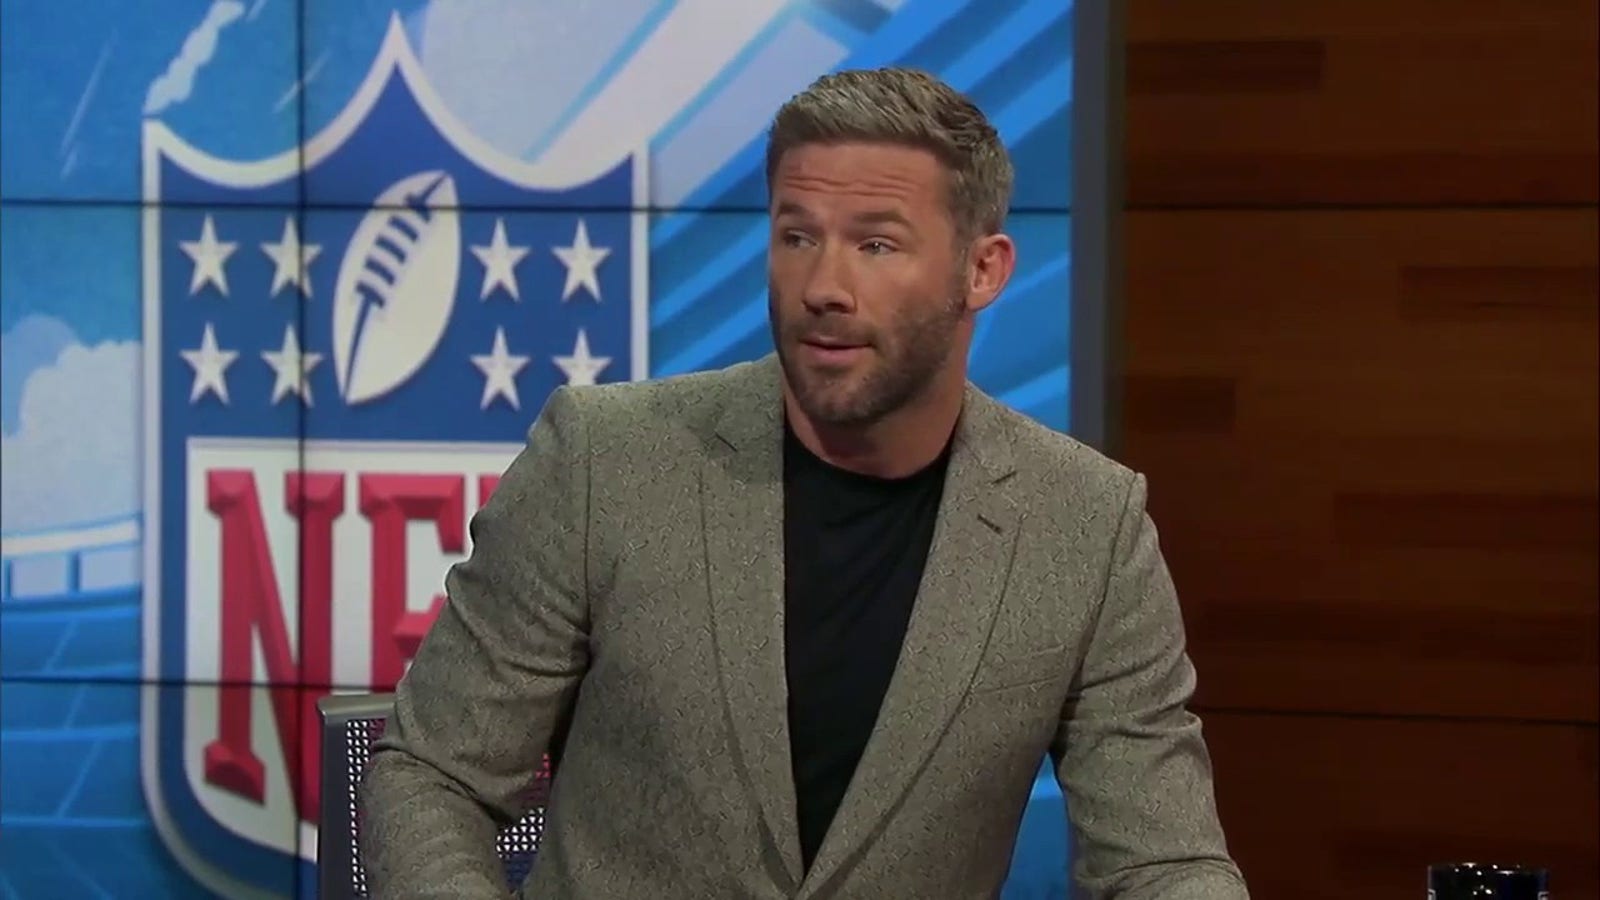 Julian Edelman on FOX NFL Kickoff: "Chiefs are not a dynasty yet"